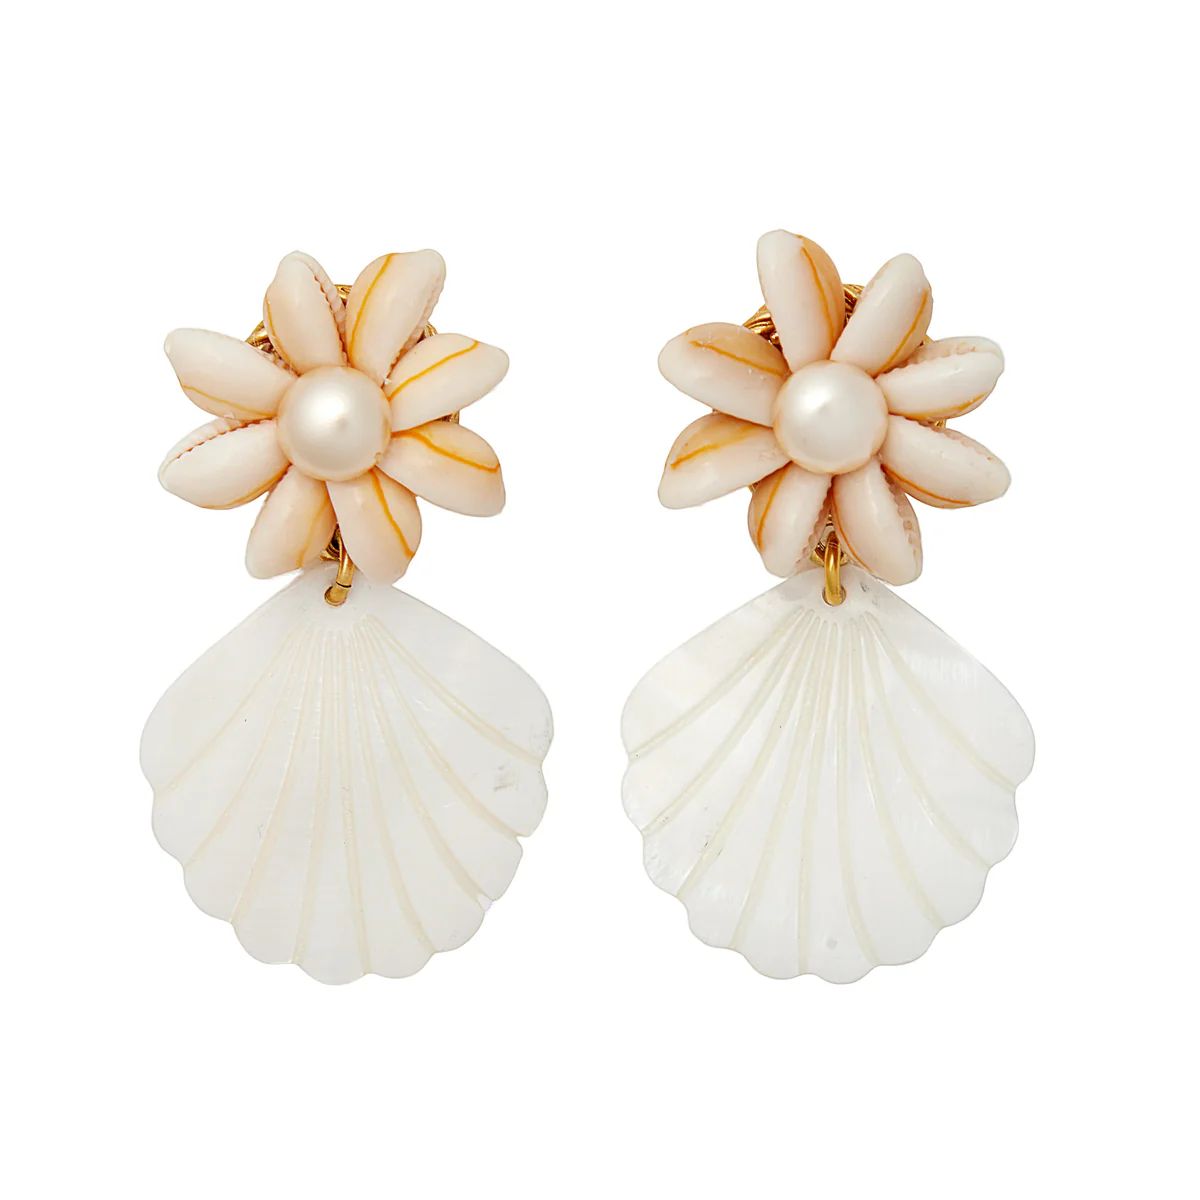 Royal Palm Earrings | Over The Moon